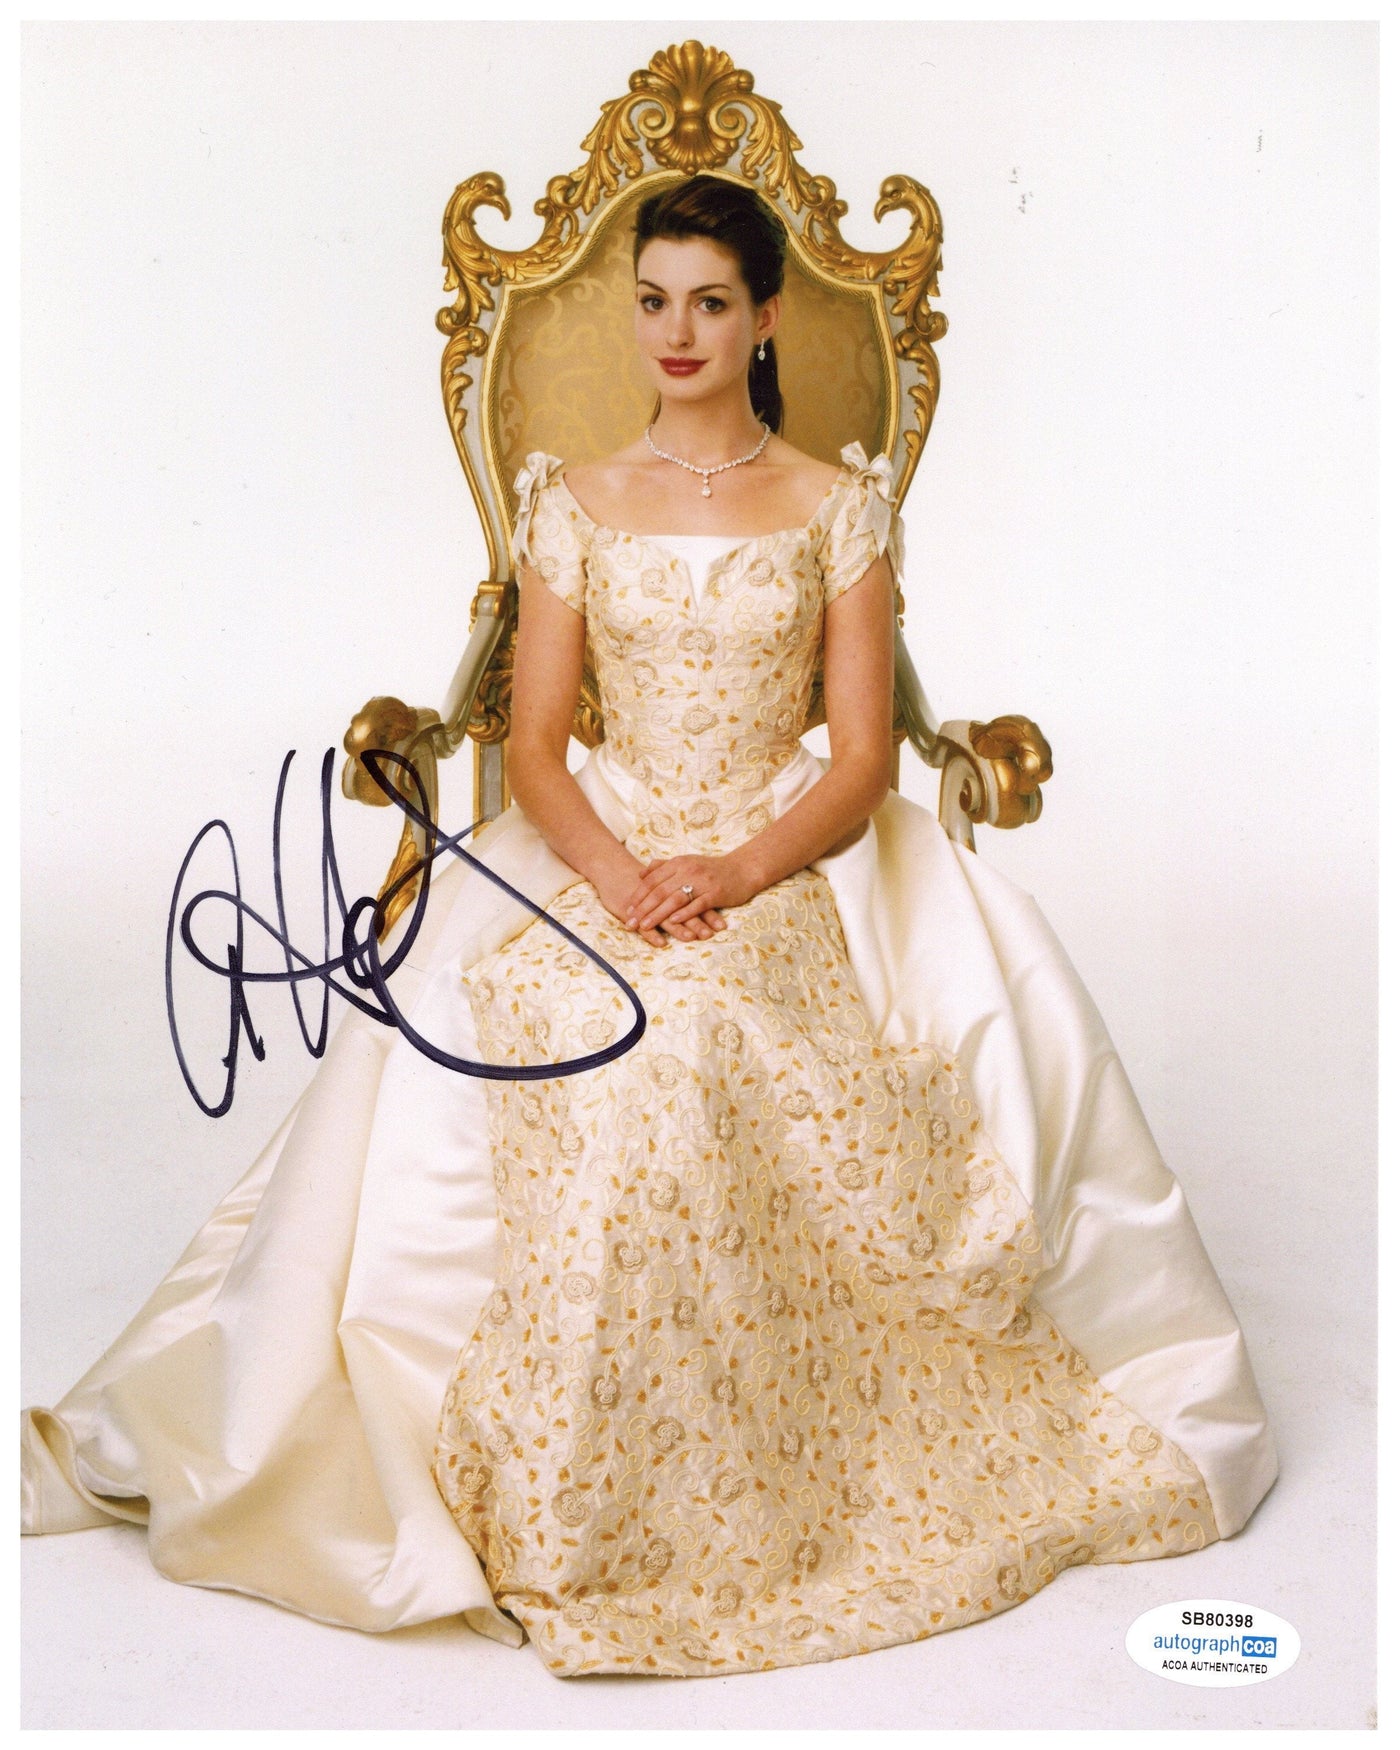 Anne Hathaway Signed 8x10 Photo The Princess Diaries Autographed ACOA